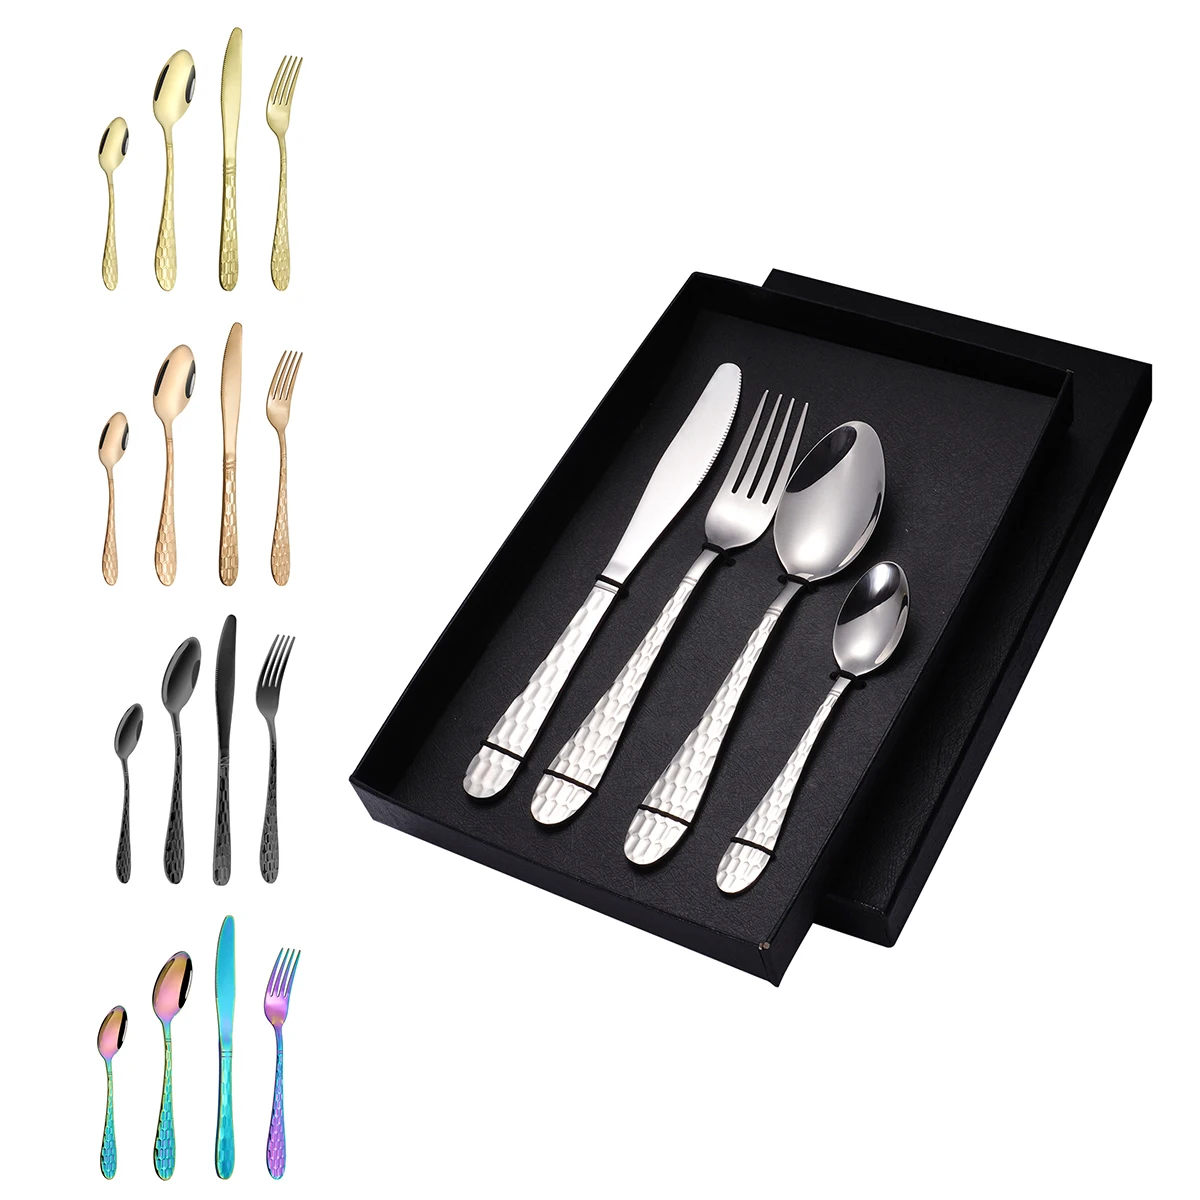 

Wholesale Reusable Portable Travel Silver Fork Spoon Knife With Gift Box Luxury Wedding Gold Plated Stainless Steel Cutlery Set, Silver, gold, rose gold,black,colorful,customizable